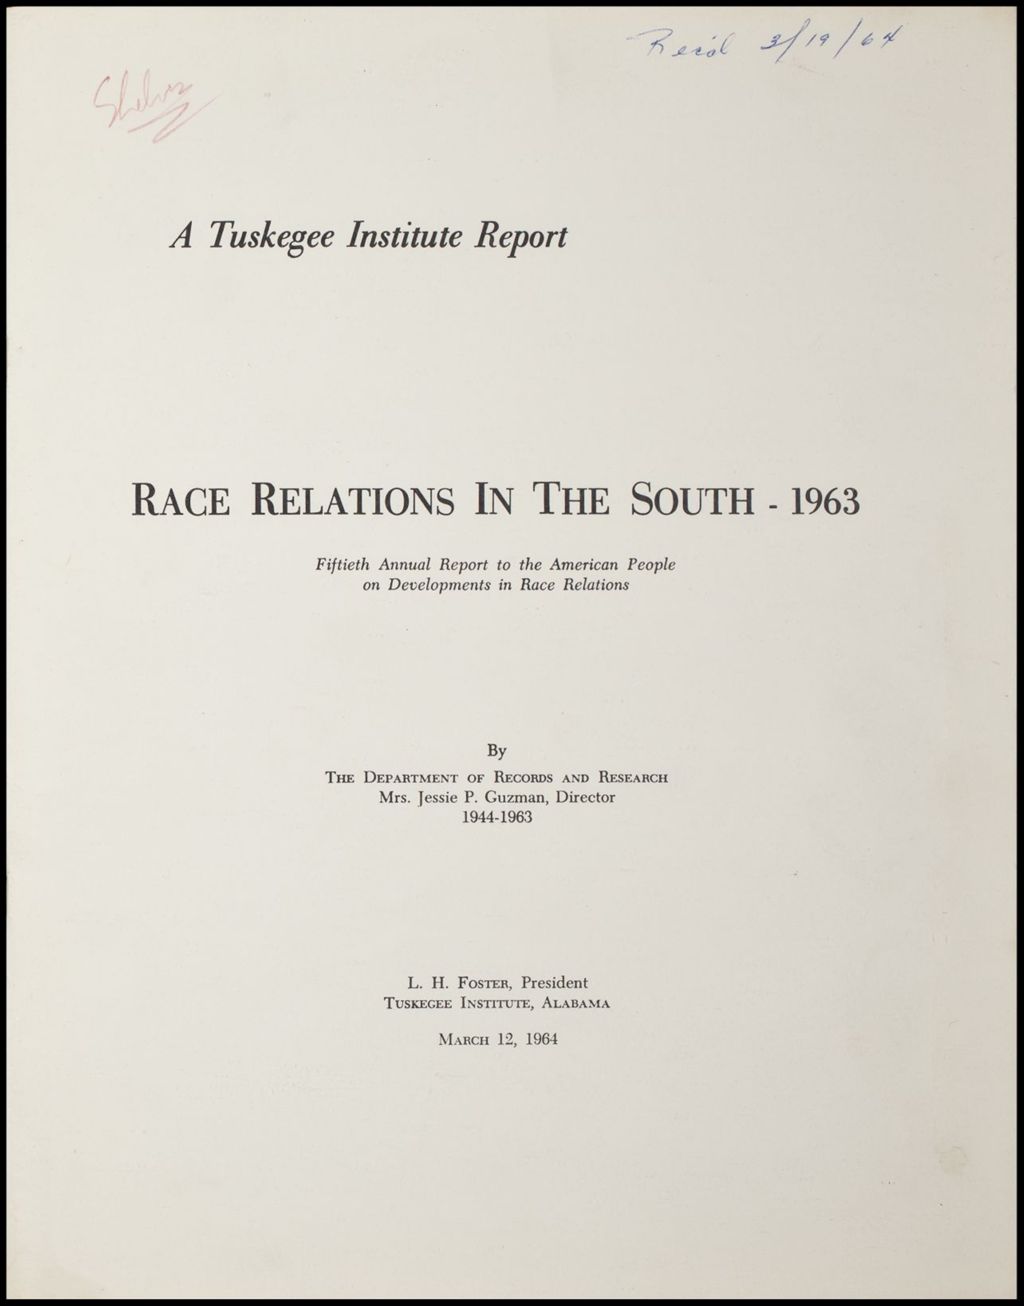 Race Relations In the South Department of Records and Research, 1964 (Folder III-1817)